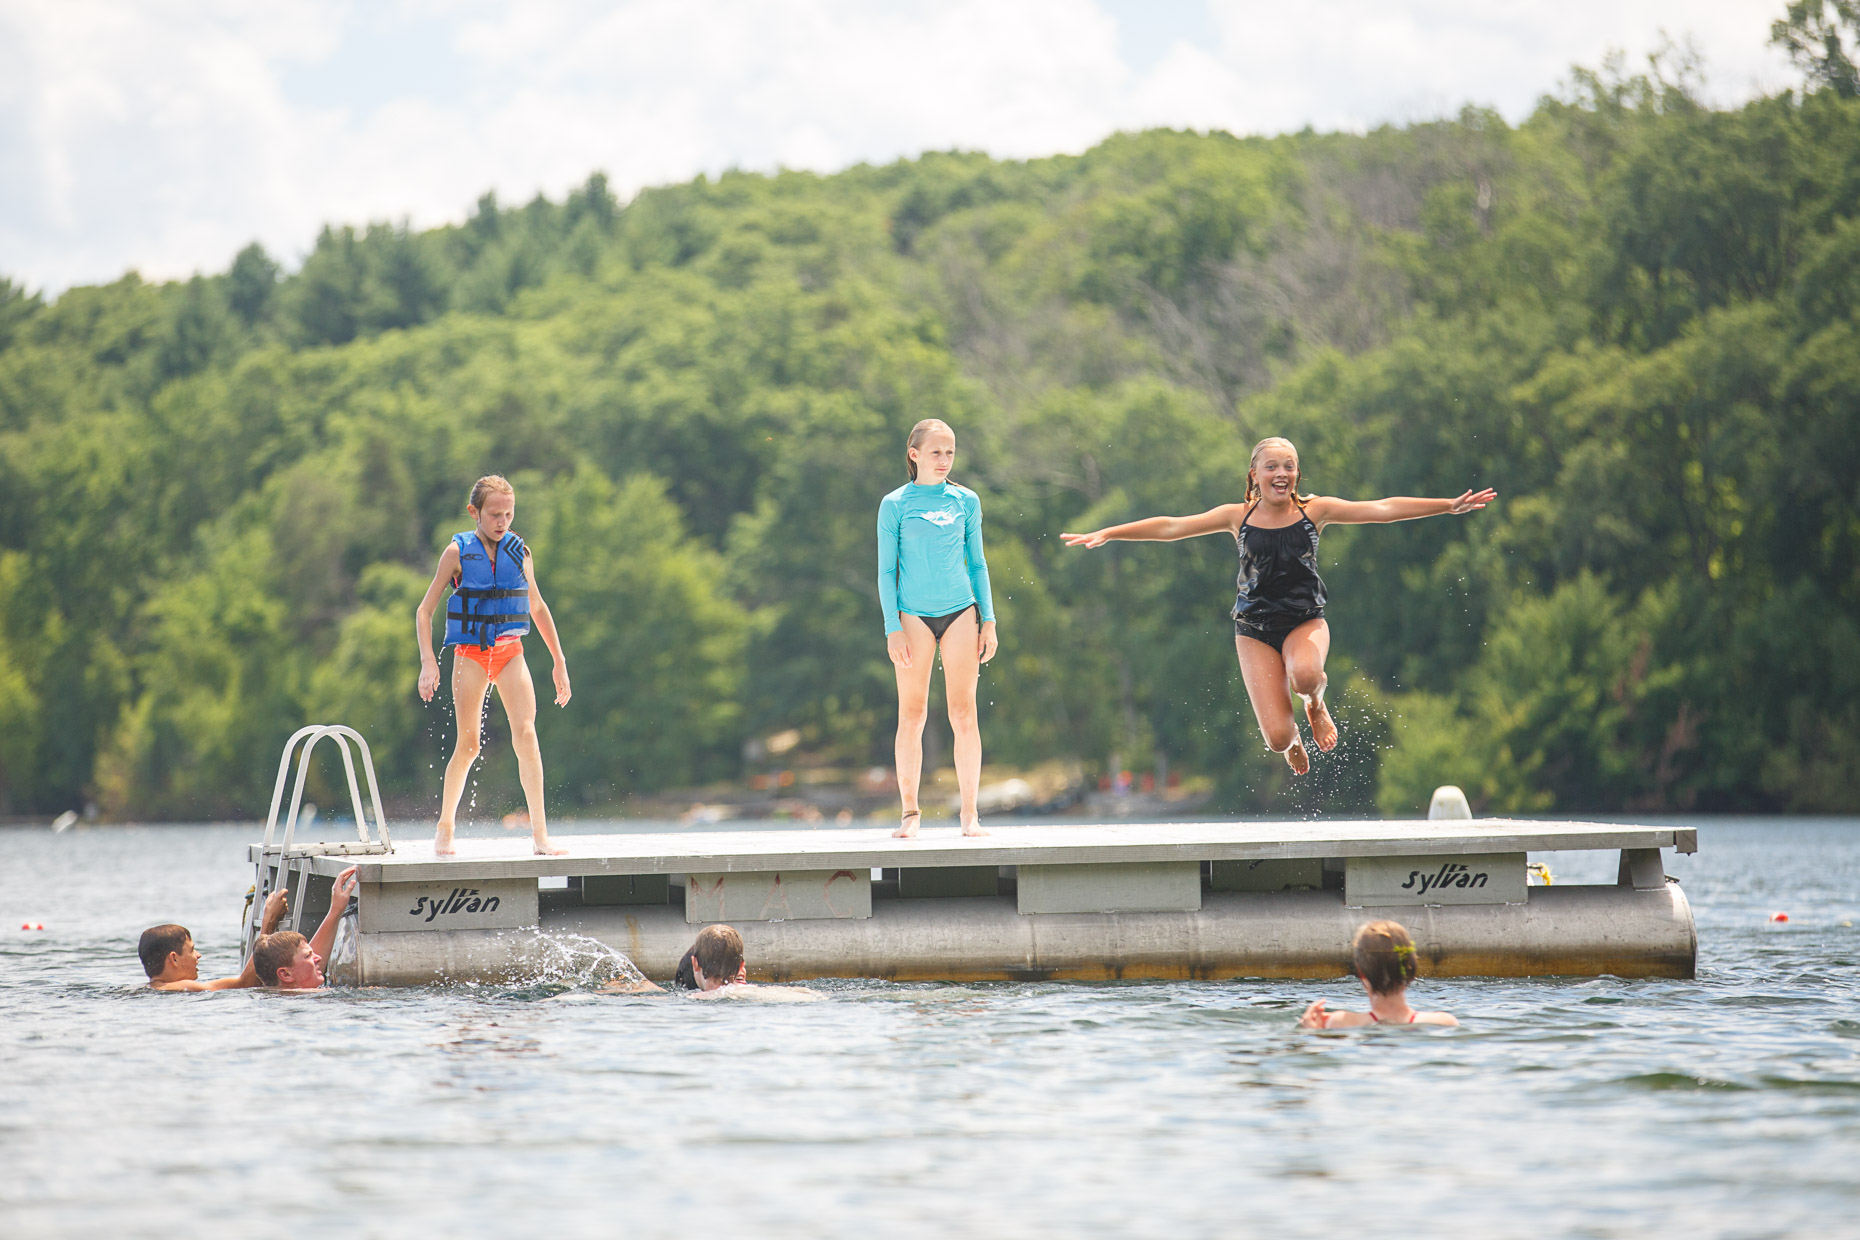 commercial photographer Wisconsin - young kids play on a swimming raft in a lake at summer camp